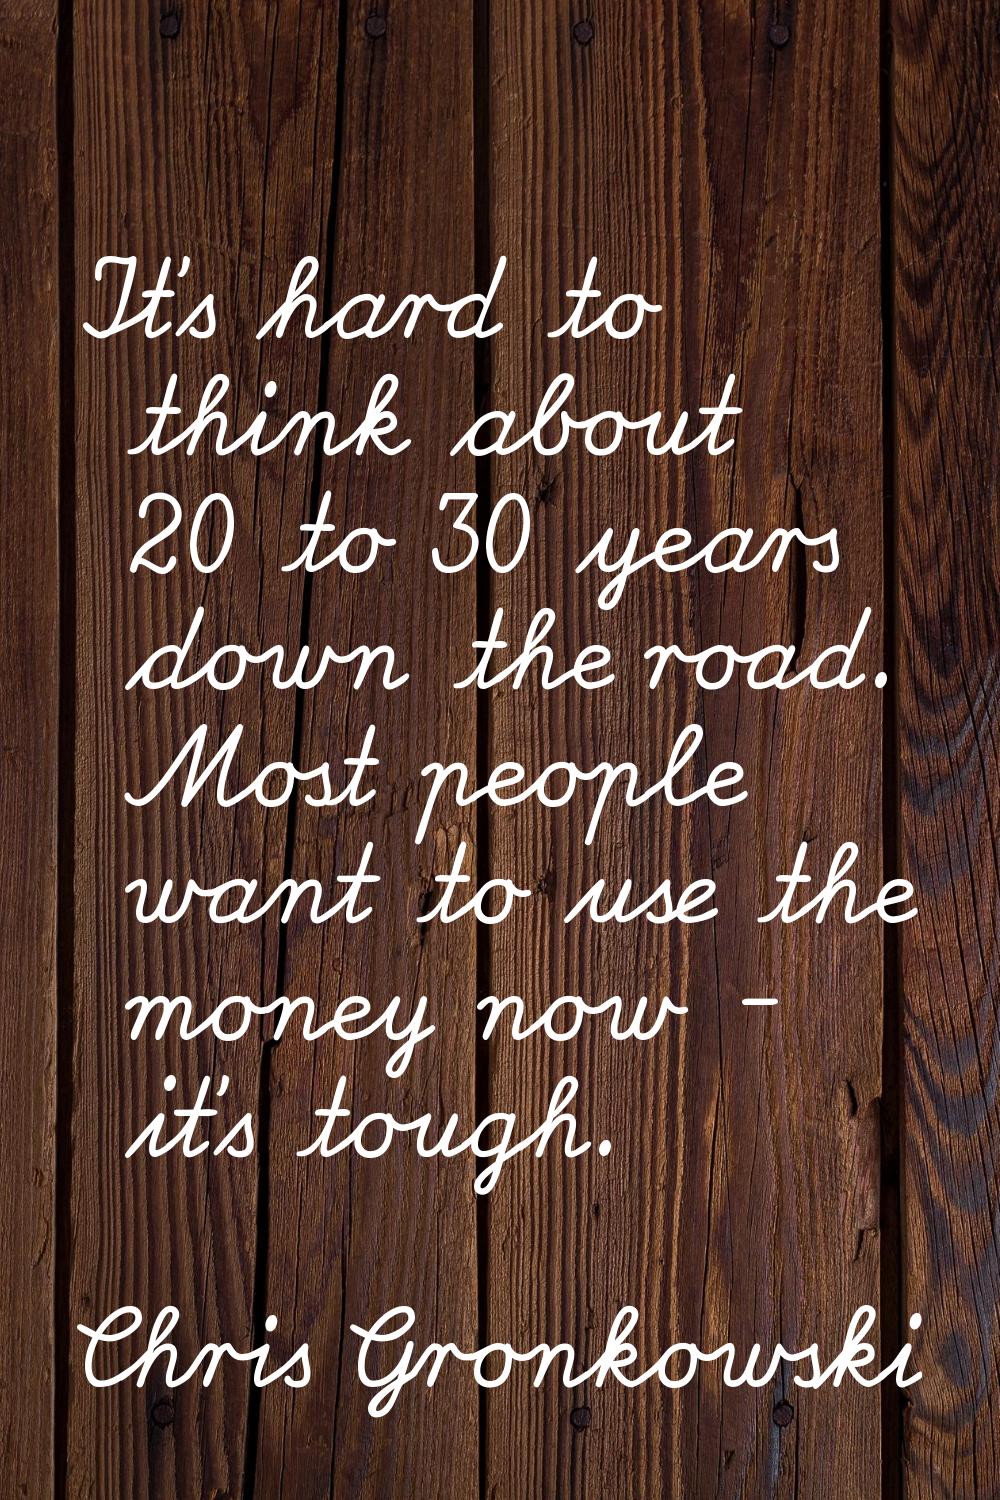 It's hard to think about 20 to 30 years down the road. Most people want to use the money now - it's